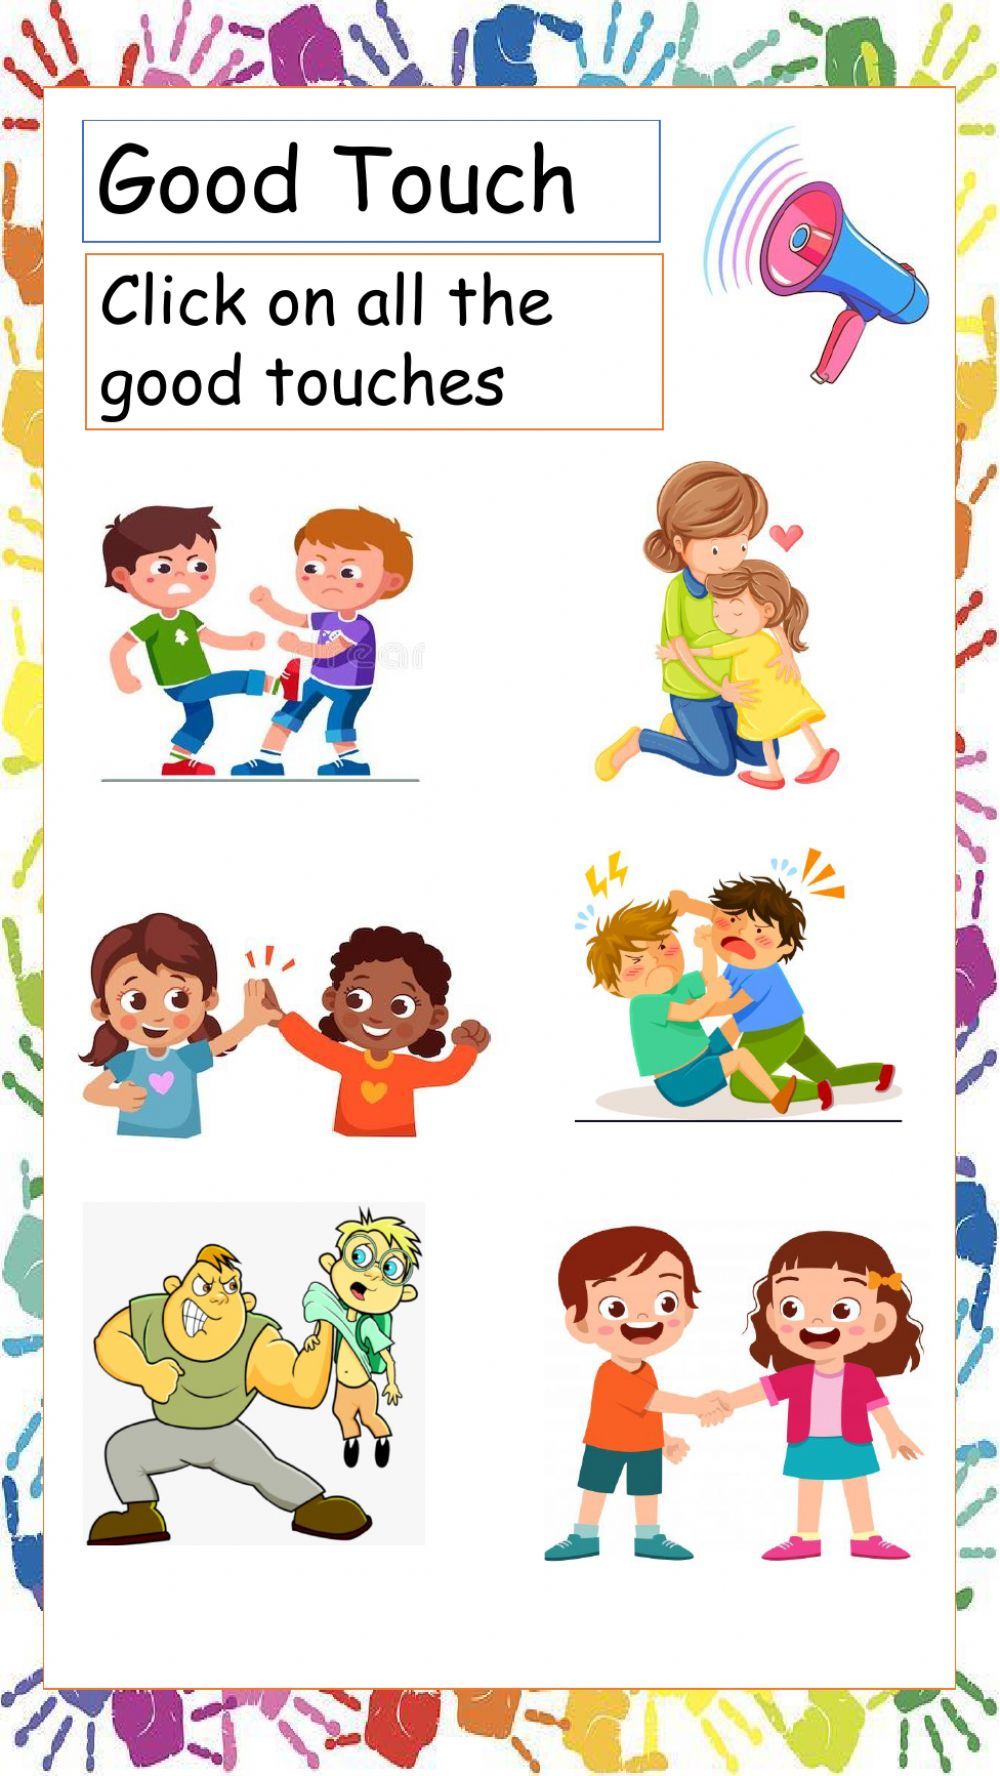 Good - Bad Touch worksheet